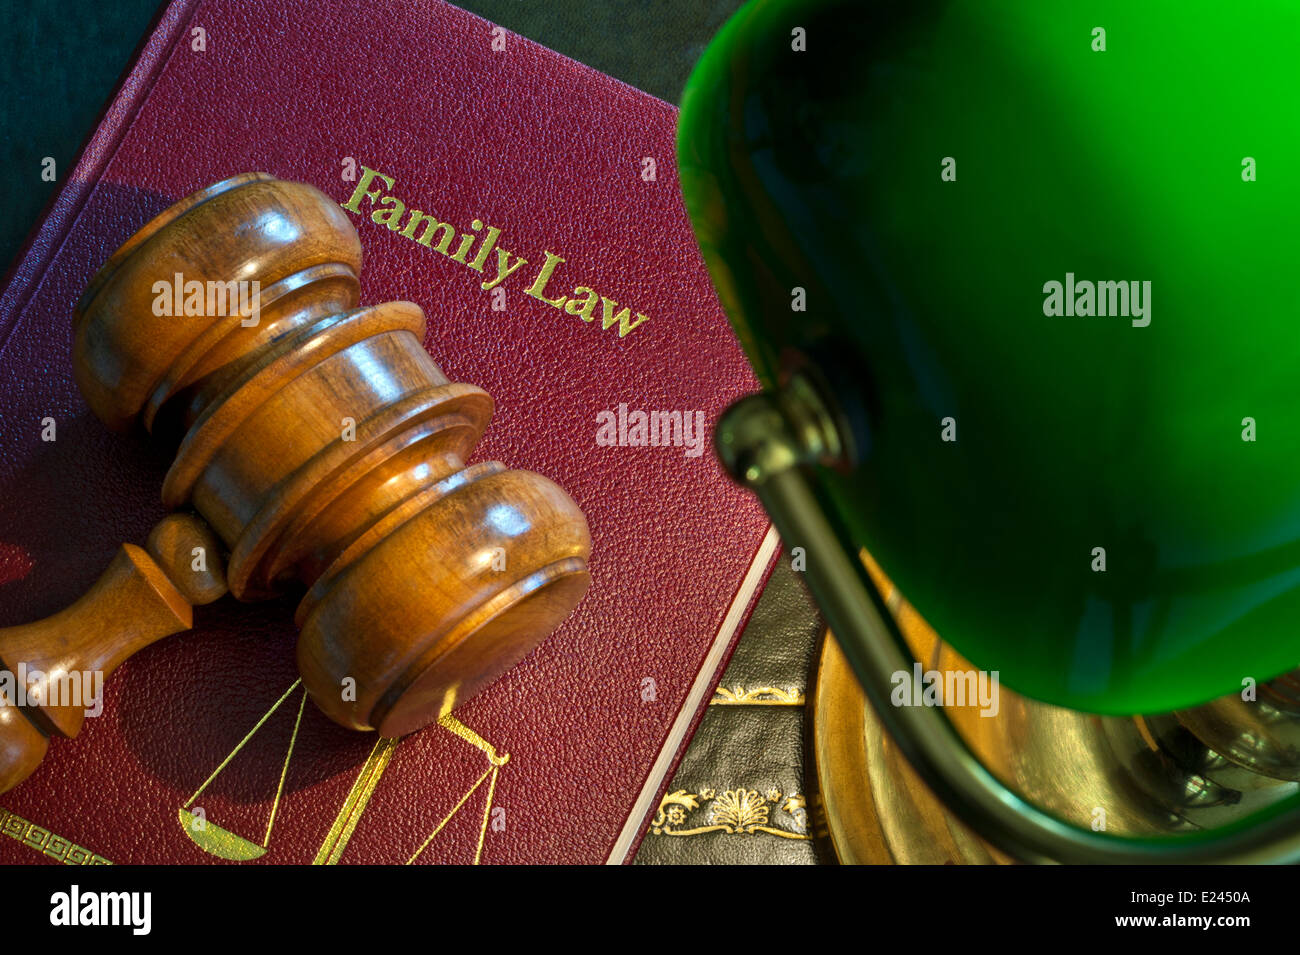 Judges wooden gavel on 'Family Law' book with scales of justice emblem illuminated by traditional desk lamp Stock Photo